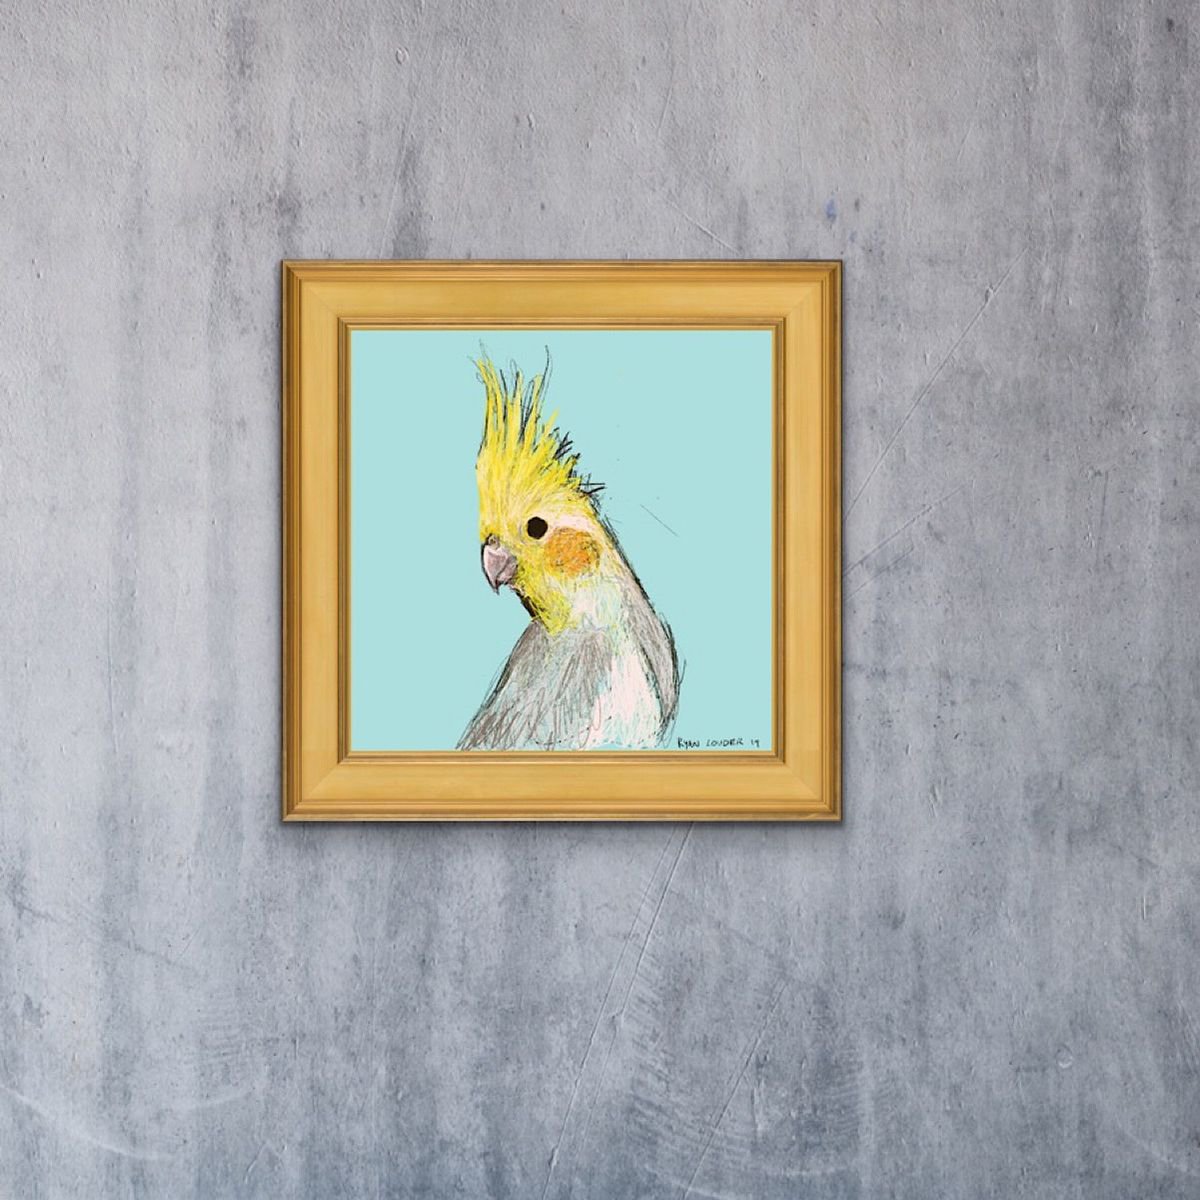 Cockatiel 12x12 limited edition by Ryan Louder